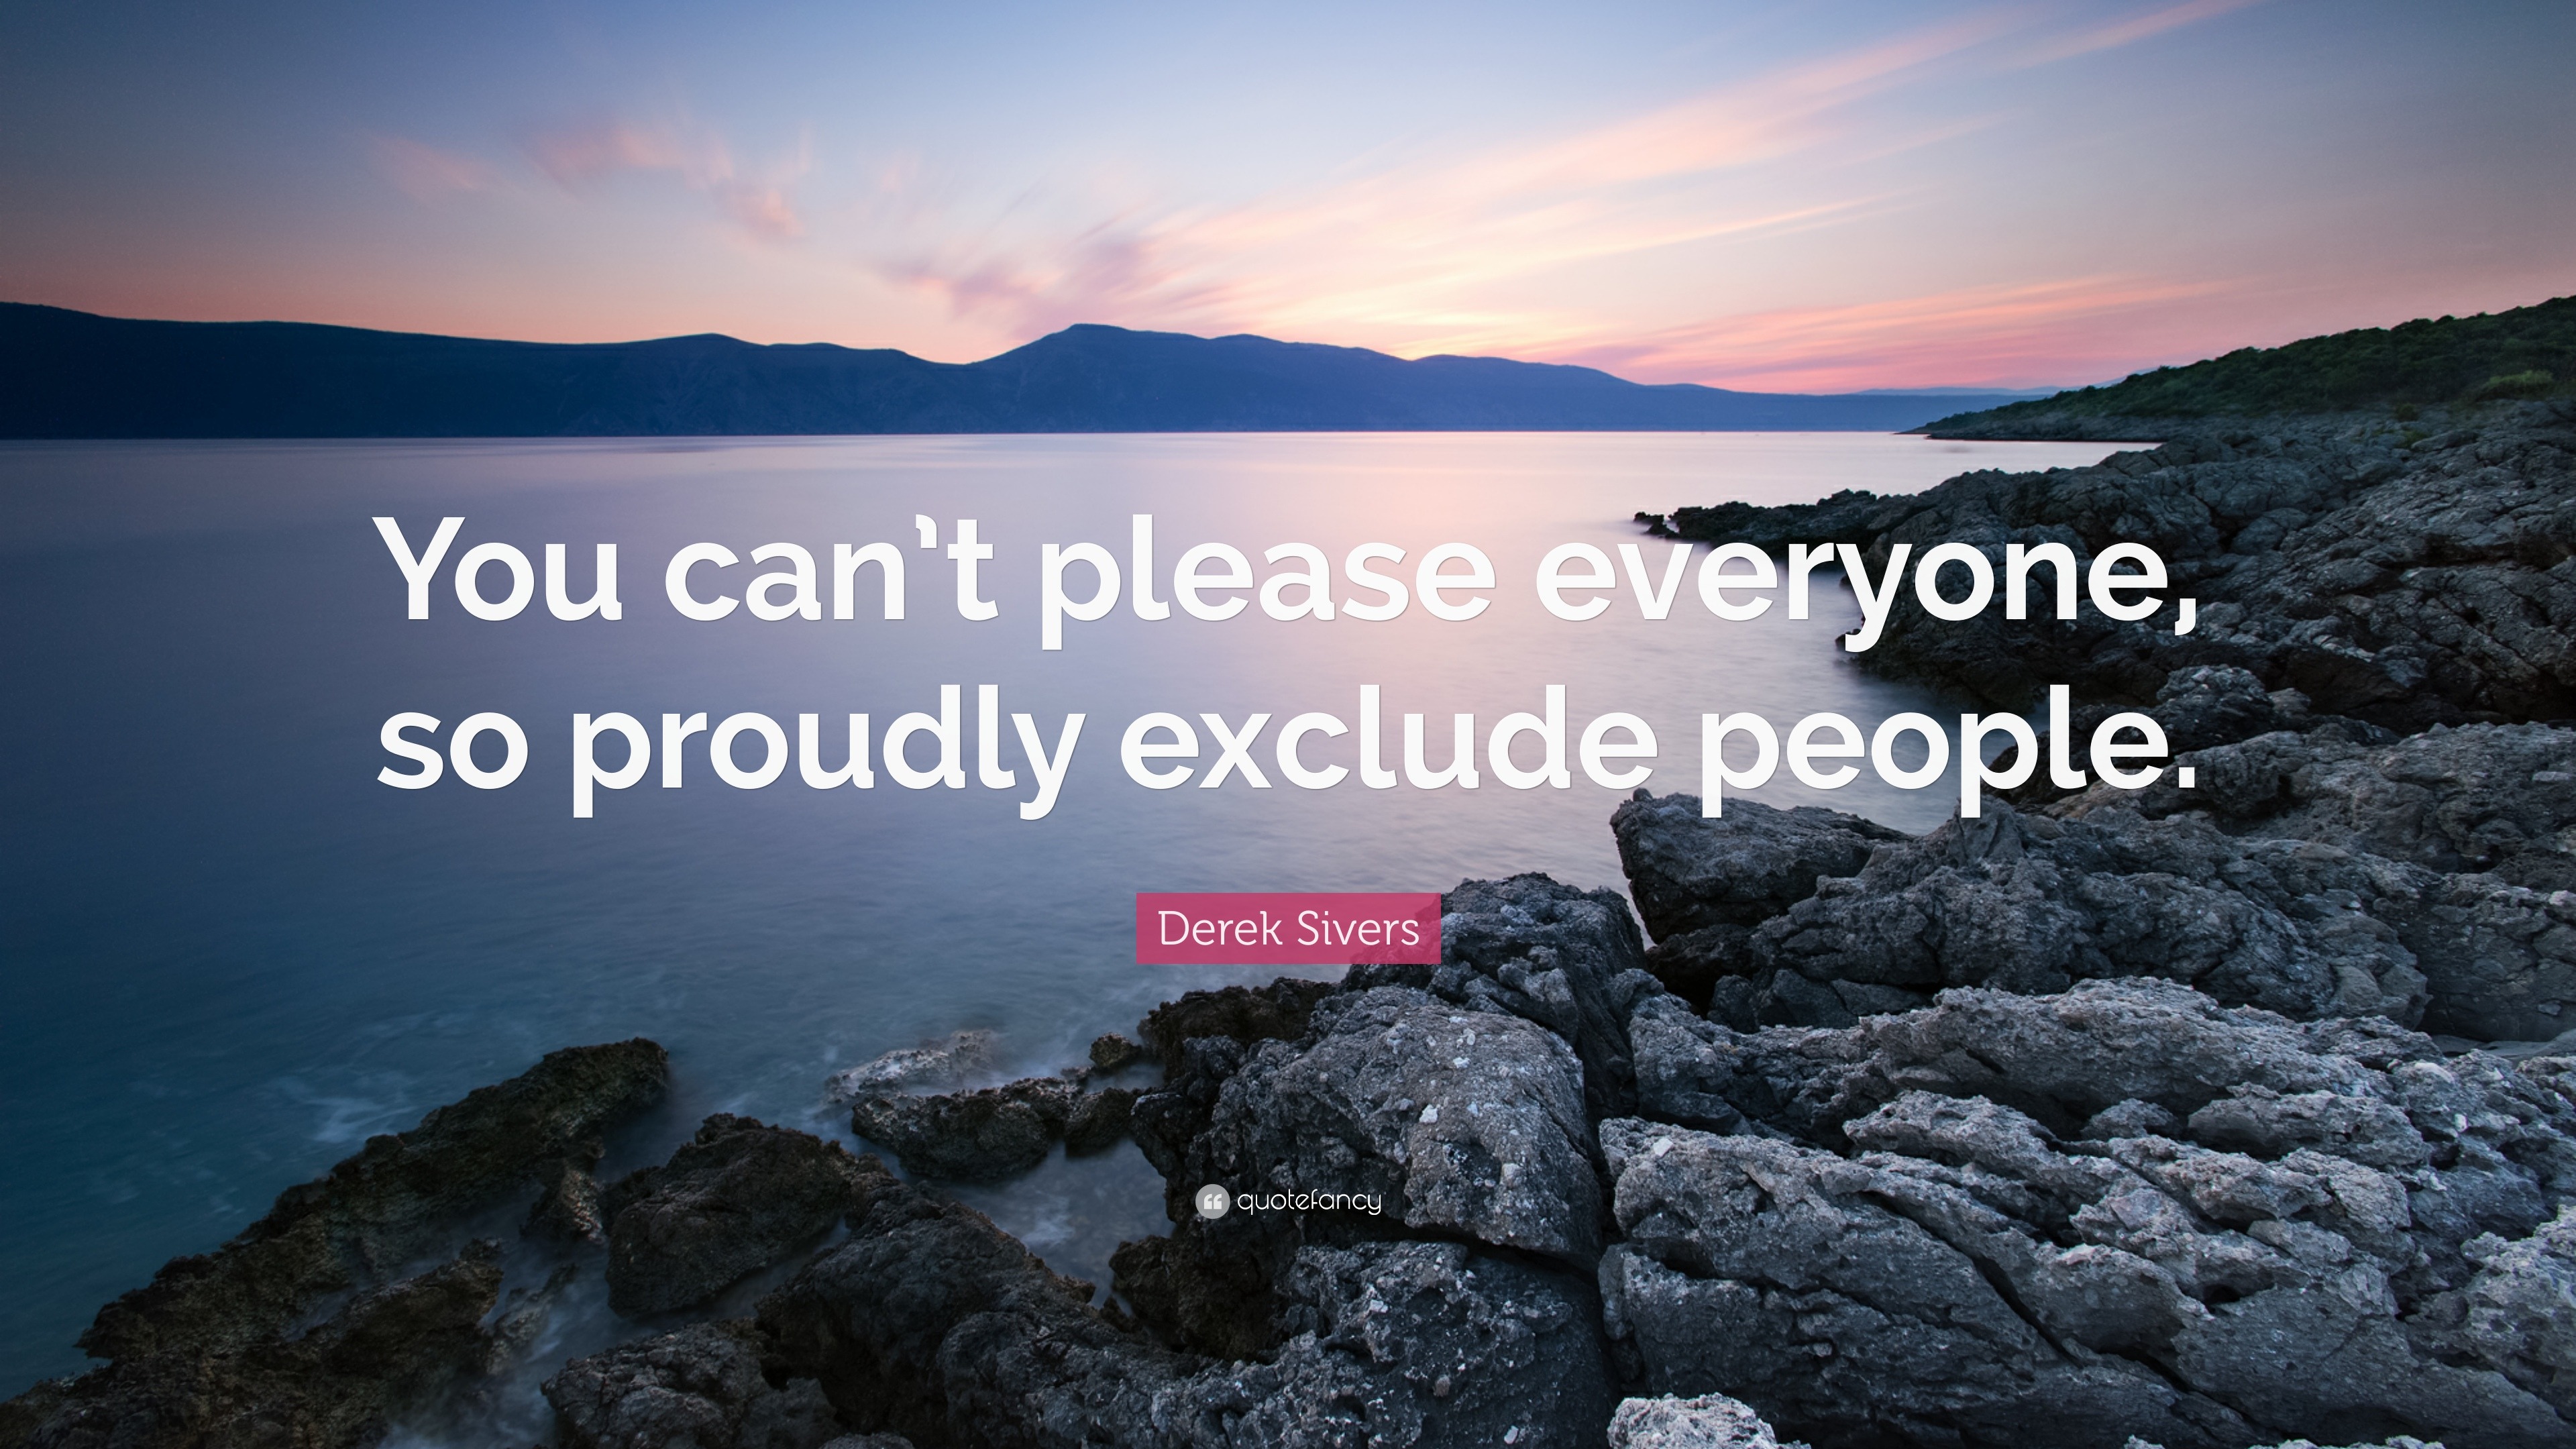 Derek Sivers Quote: “You can't please everyone, so proudly exclude